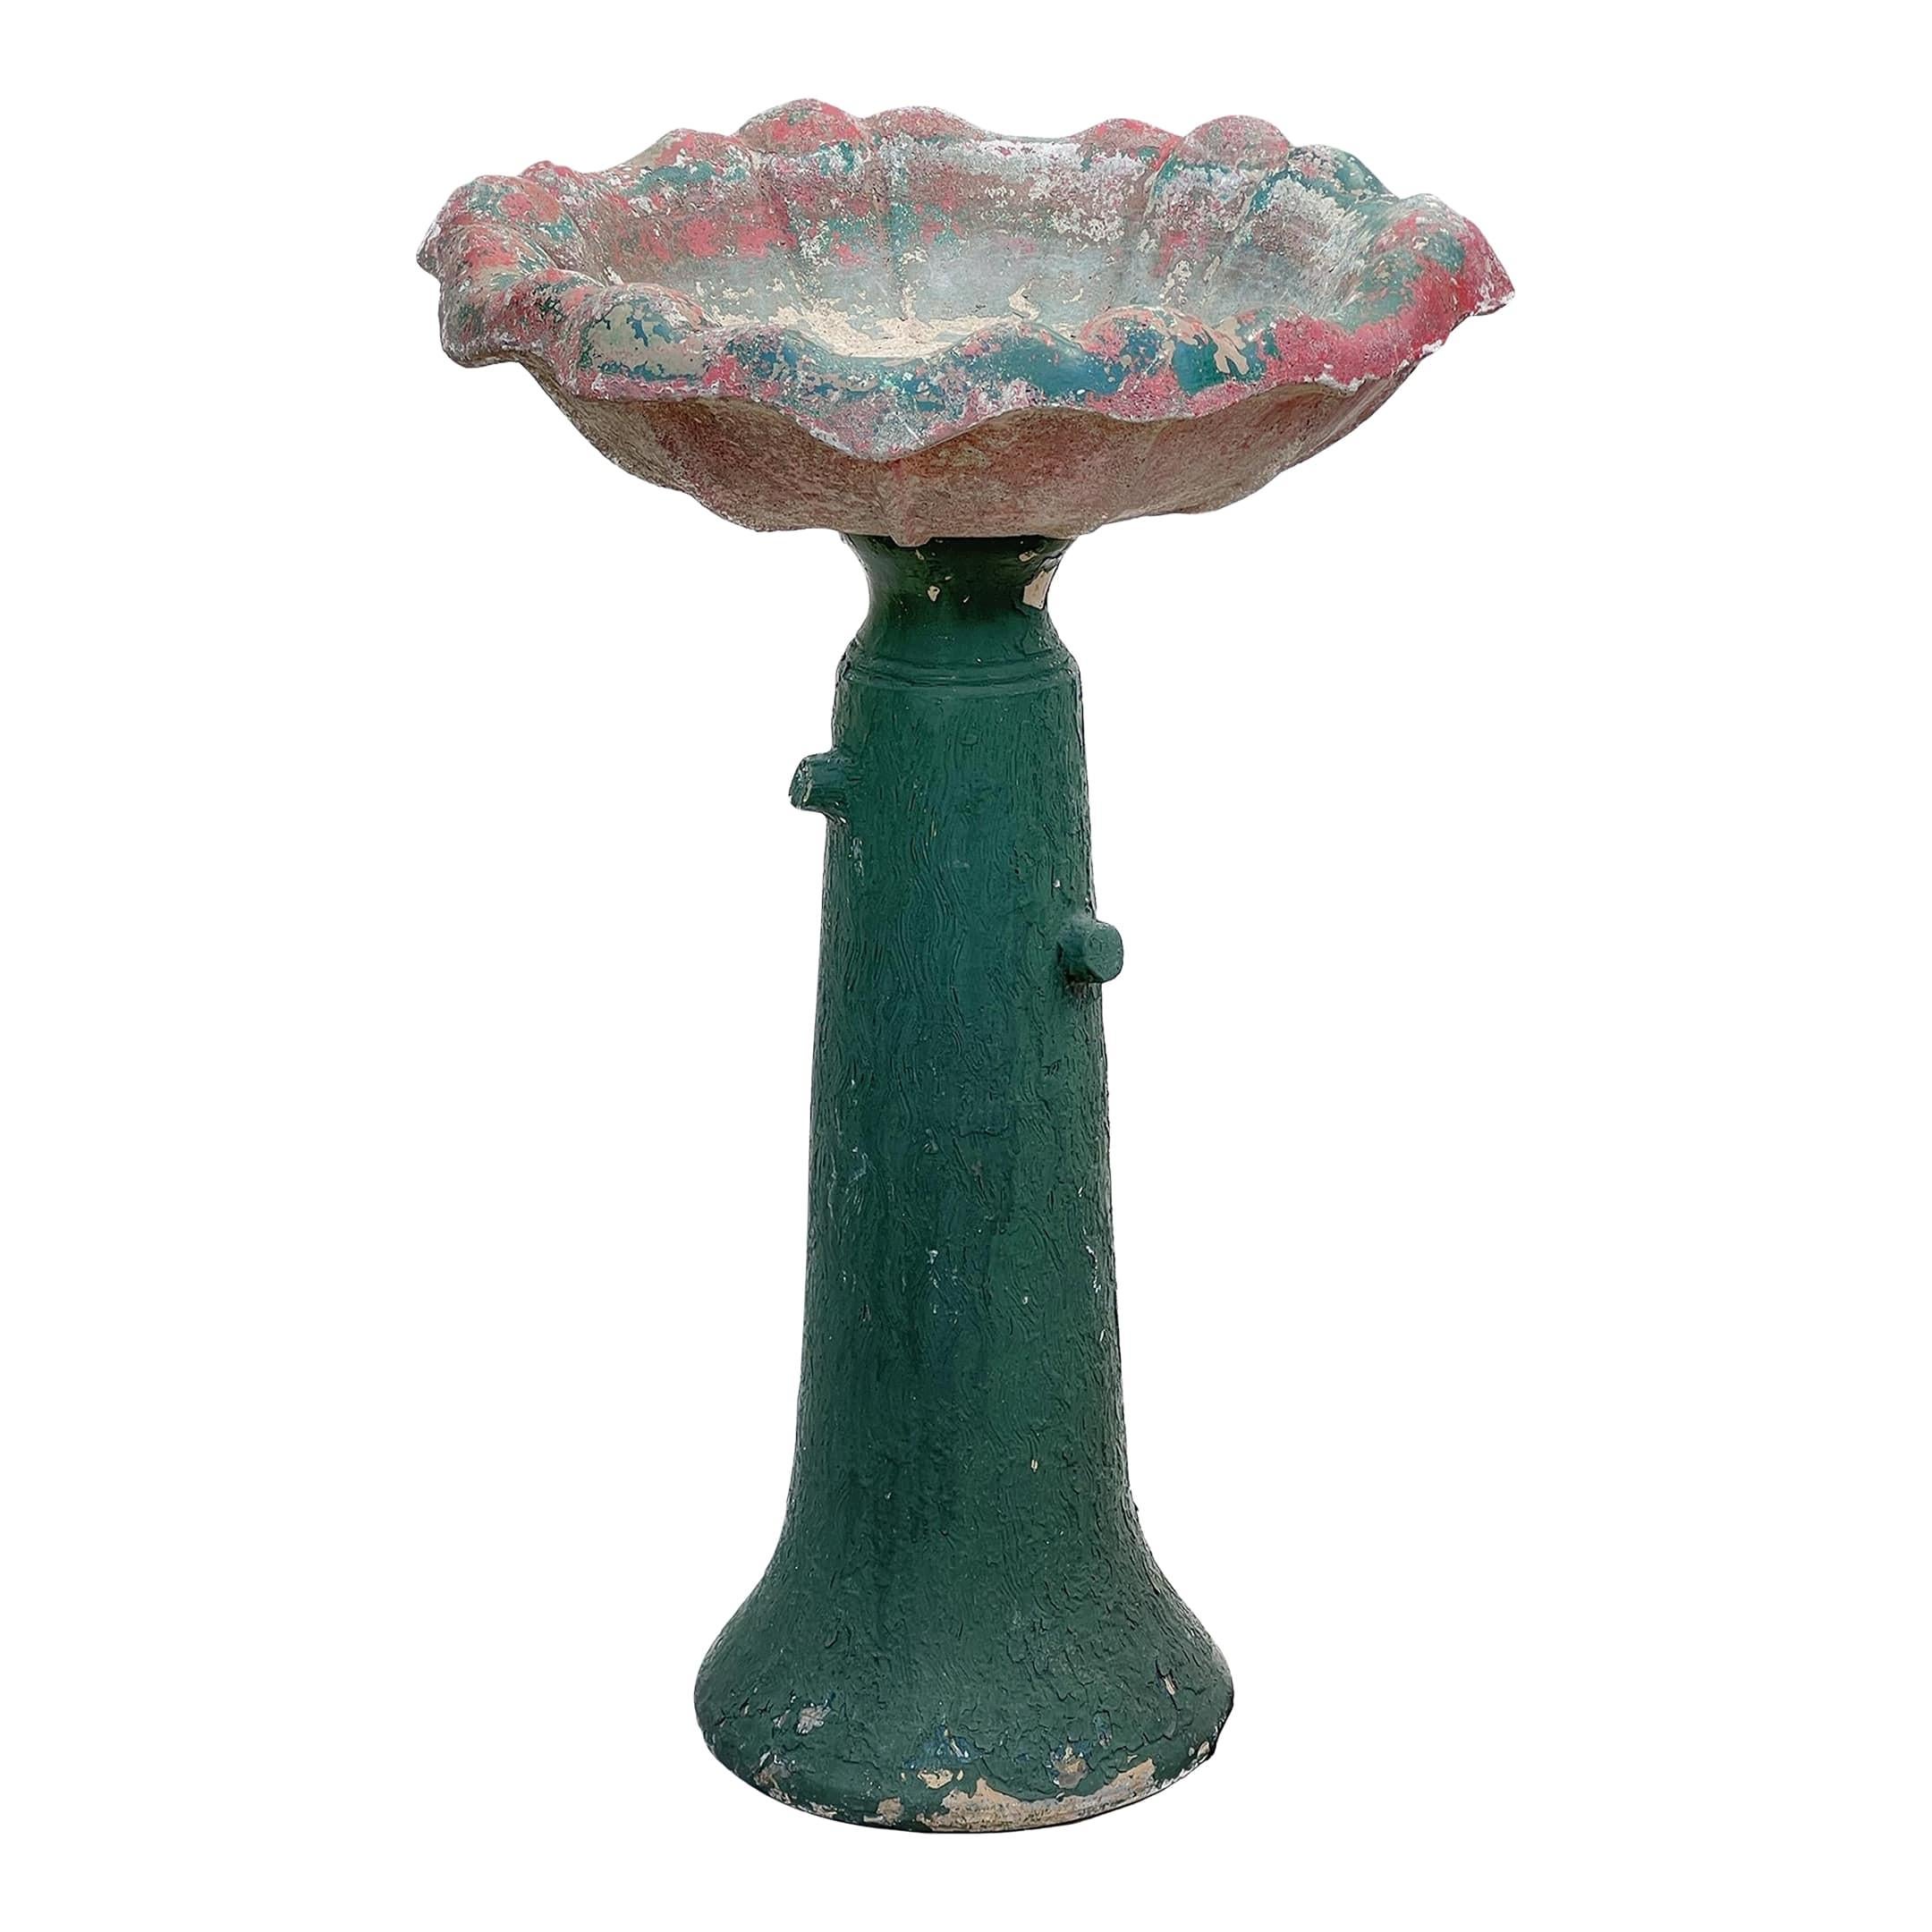 Early 20th Century Painted Concrete Birdbath With Pottery Base